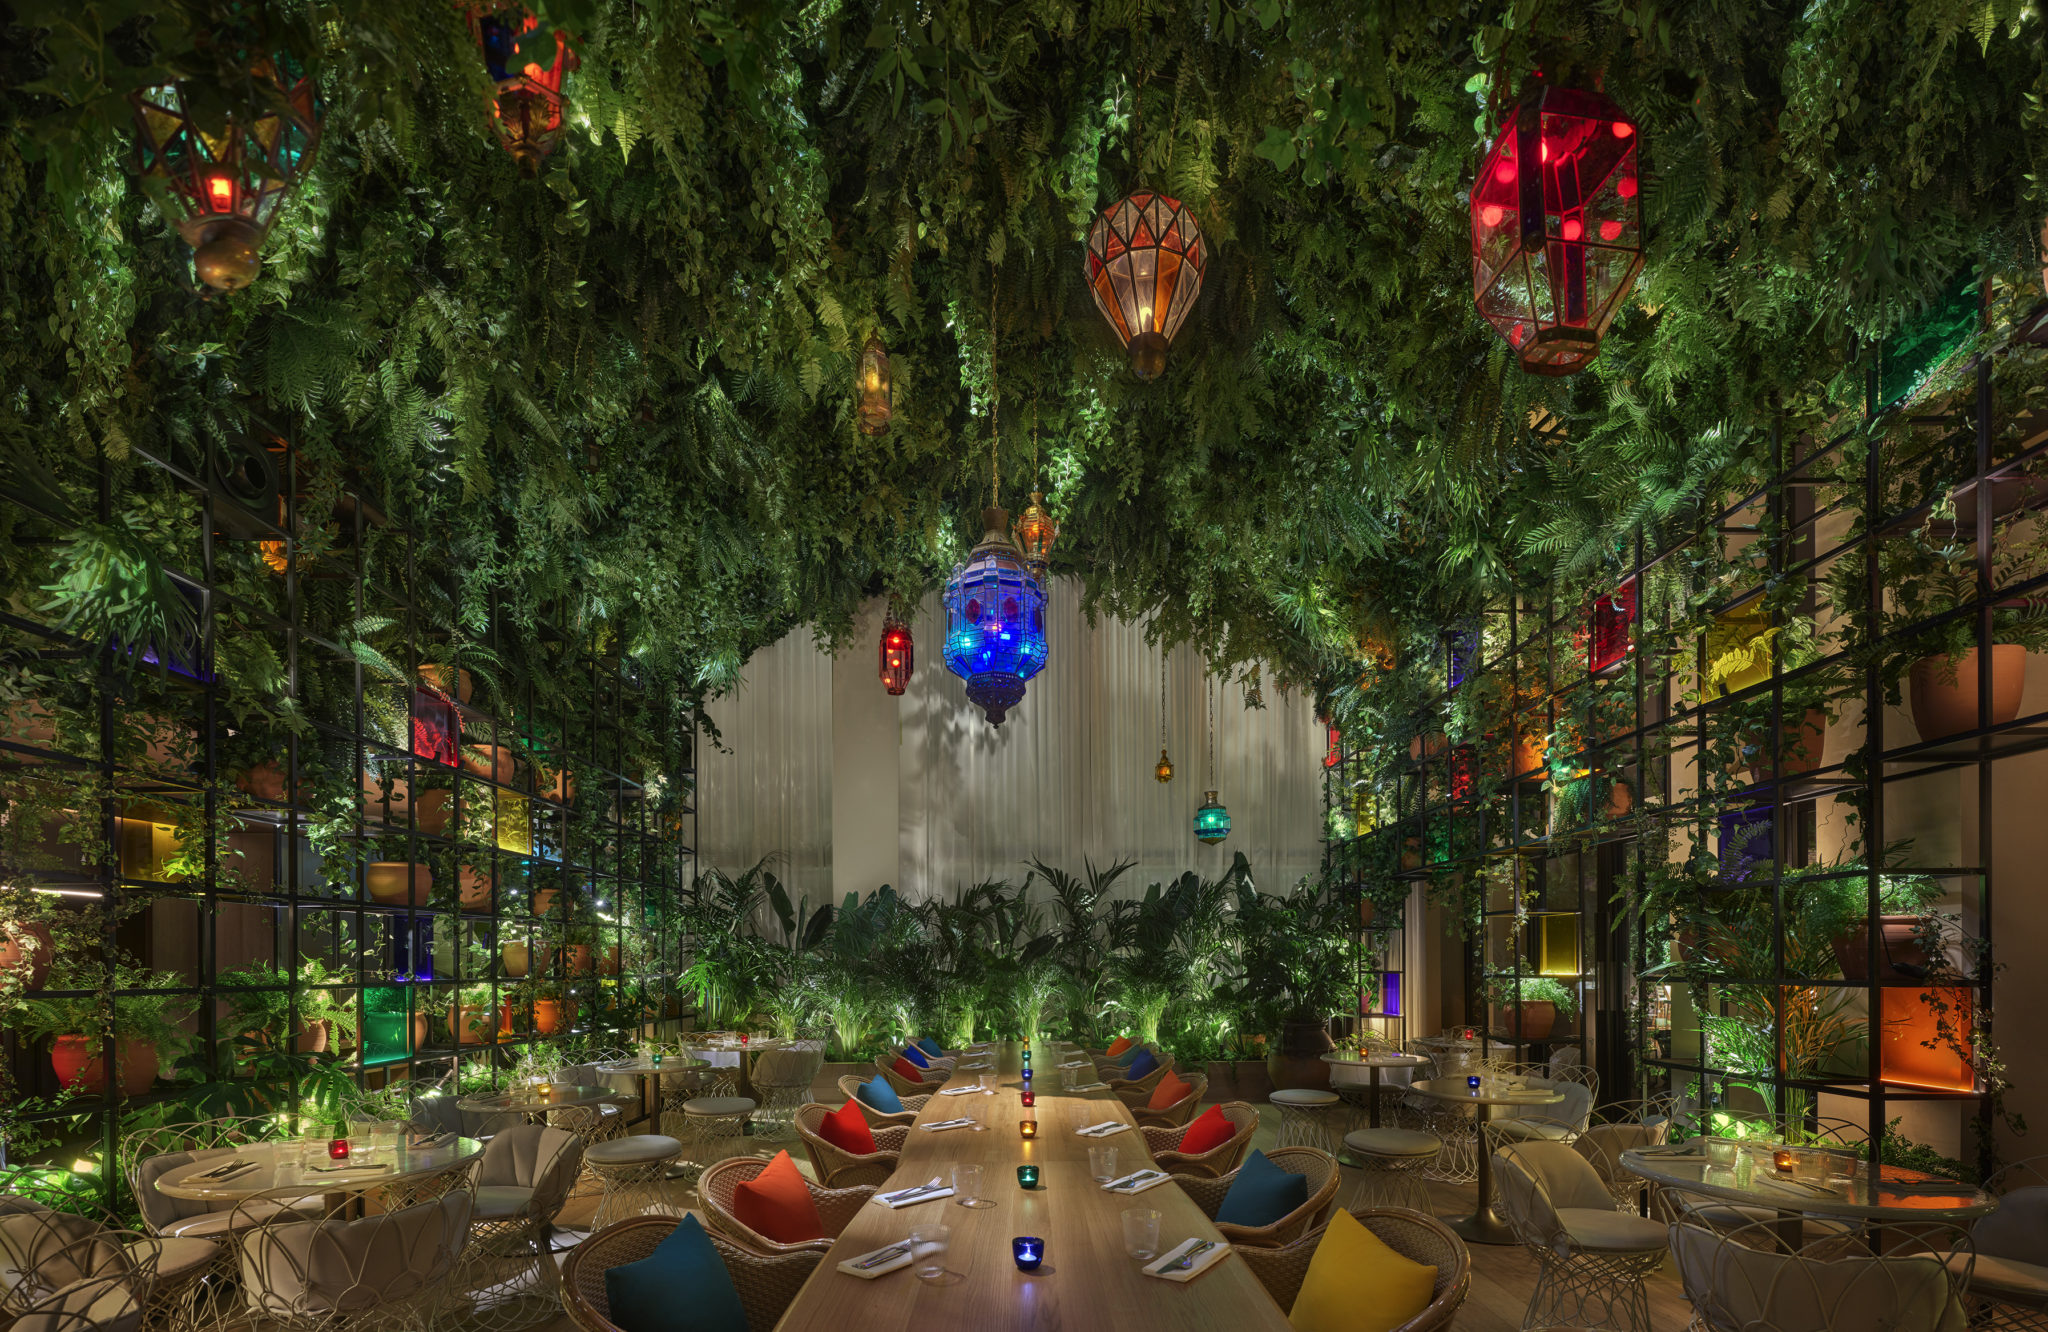 Dining area with hanging garden and colorful lanterns